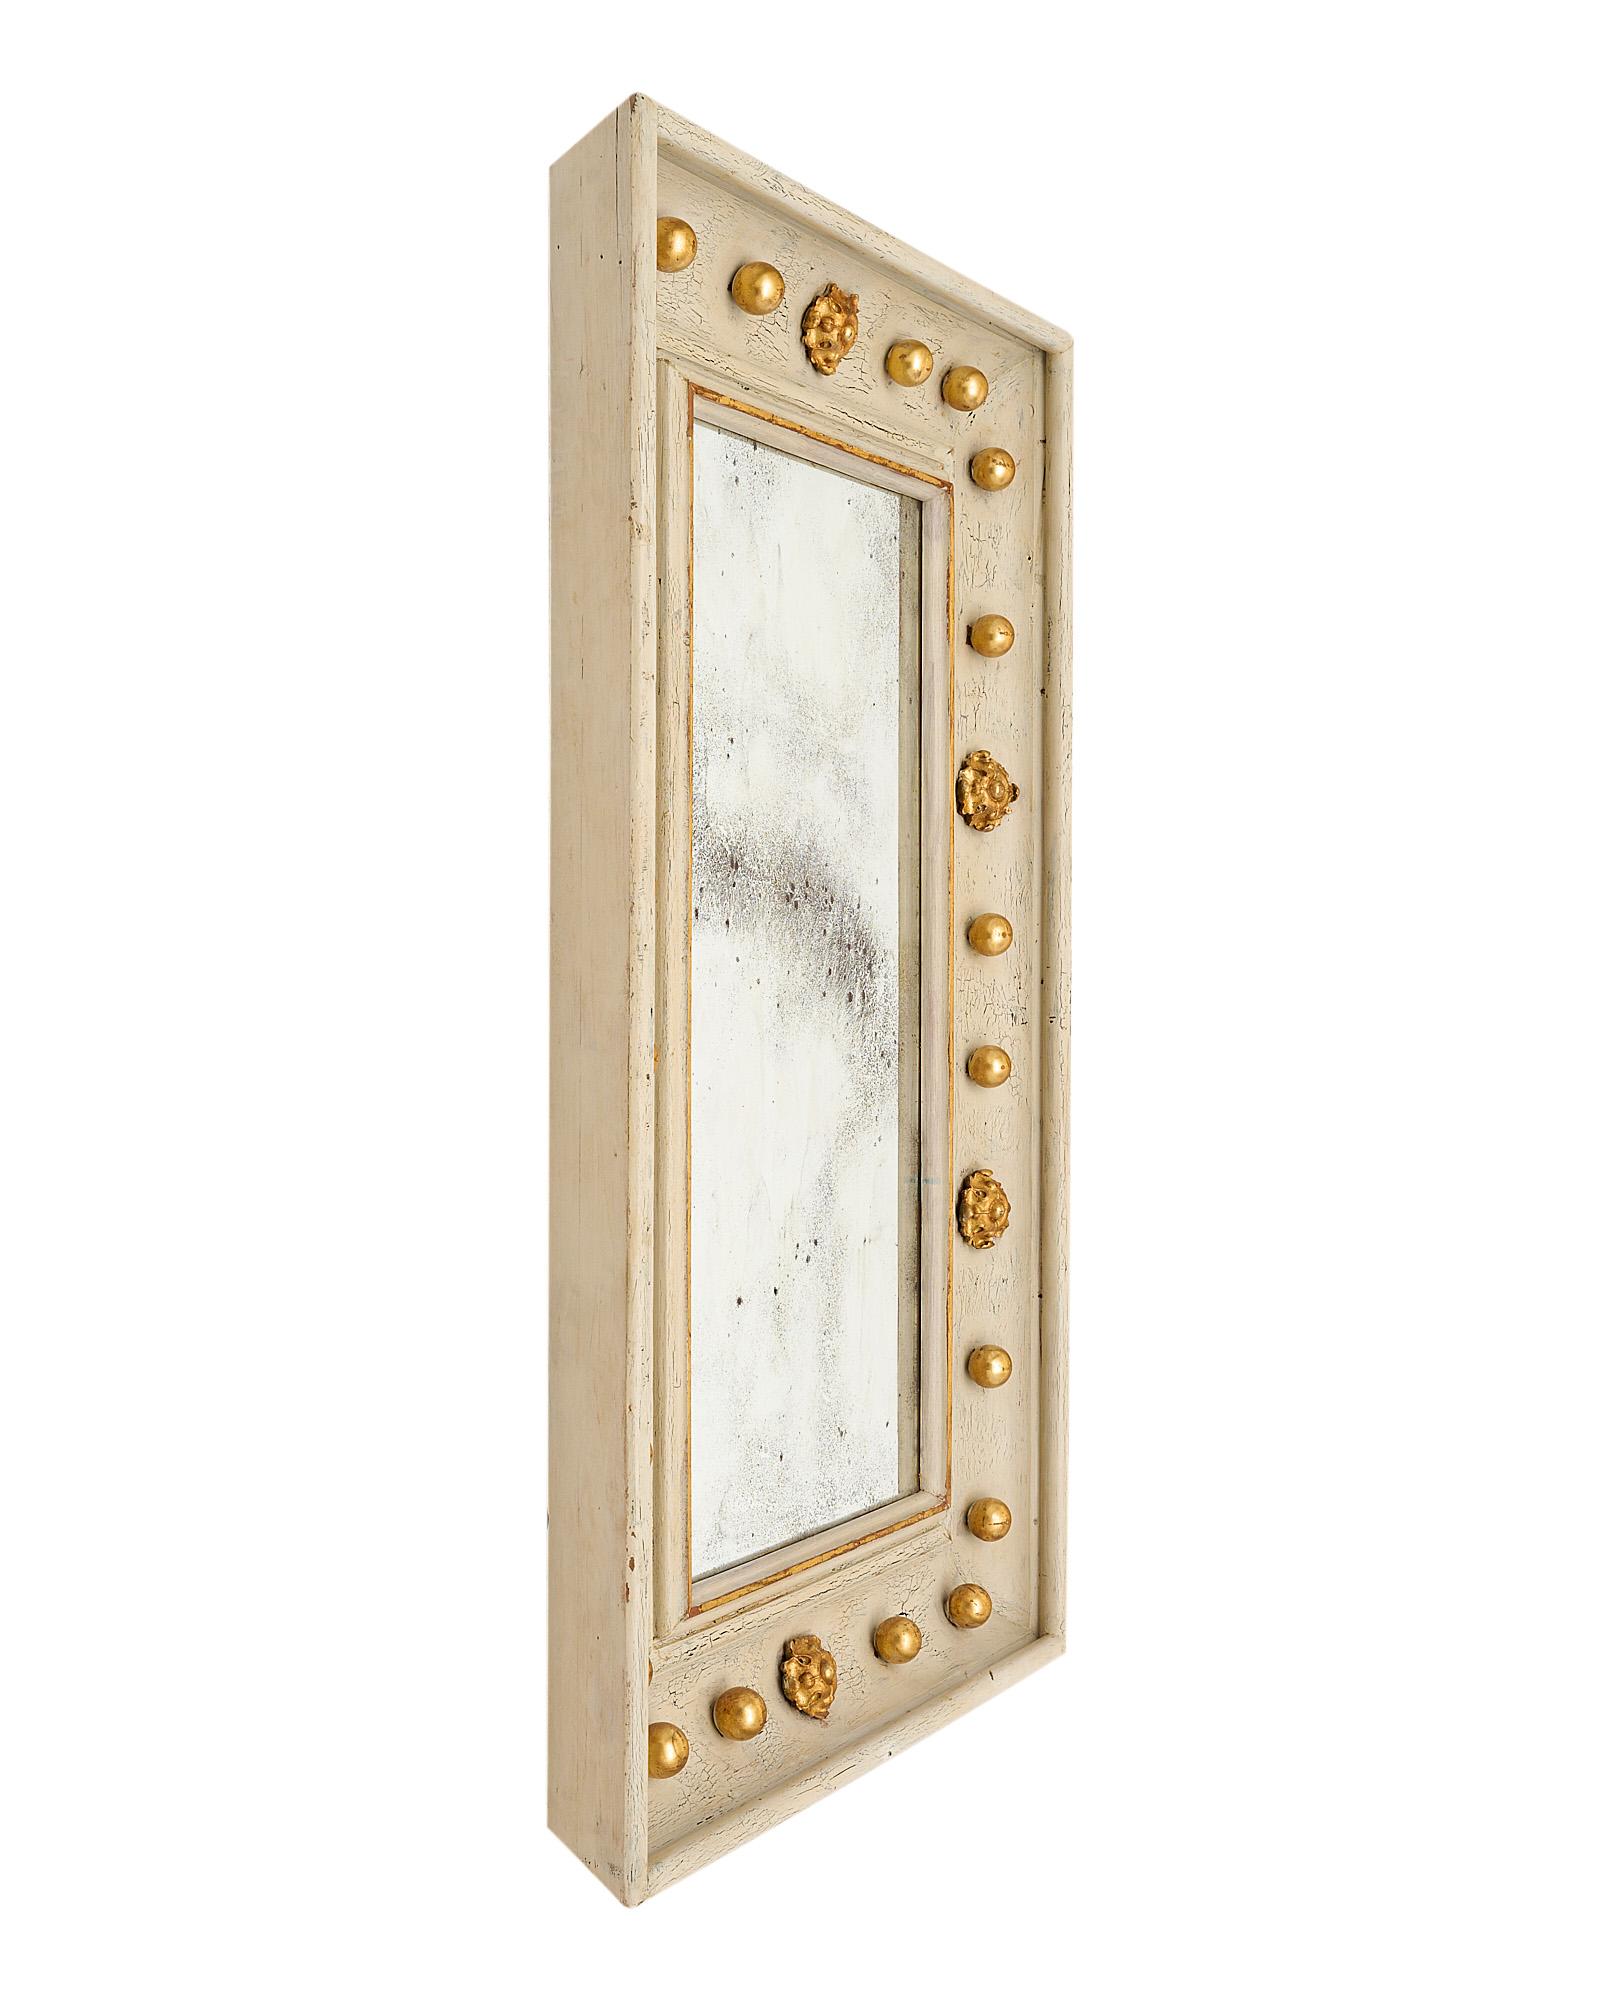 Mirror, French, in the neoclassical style and made of a hand-carved wooden frame with its original  “Trianon” gray paint and antique mirror. The highly decorative piece features 24 carat gold leafed spheres and Macarons.
